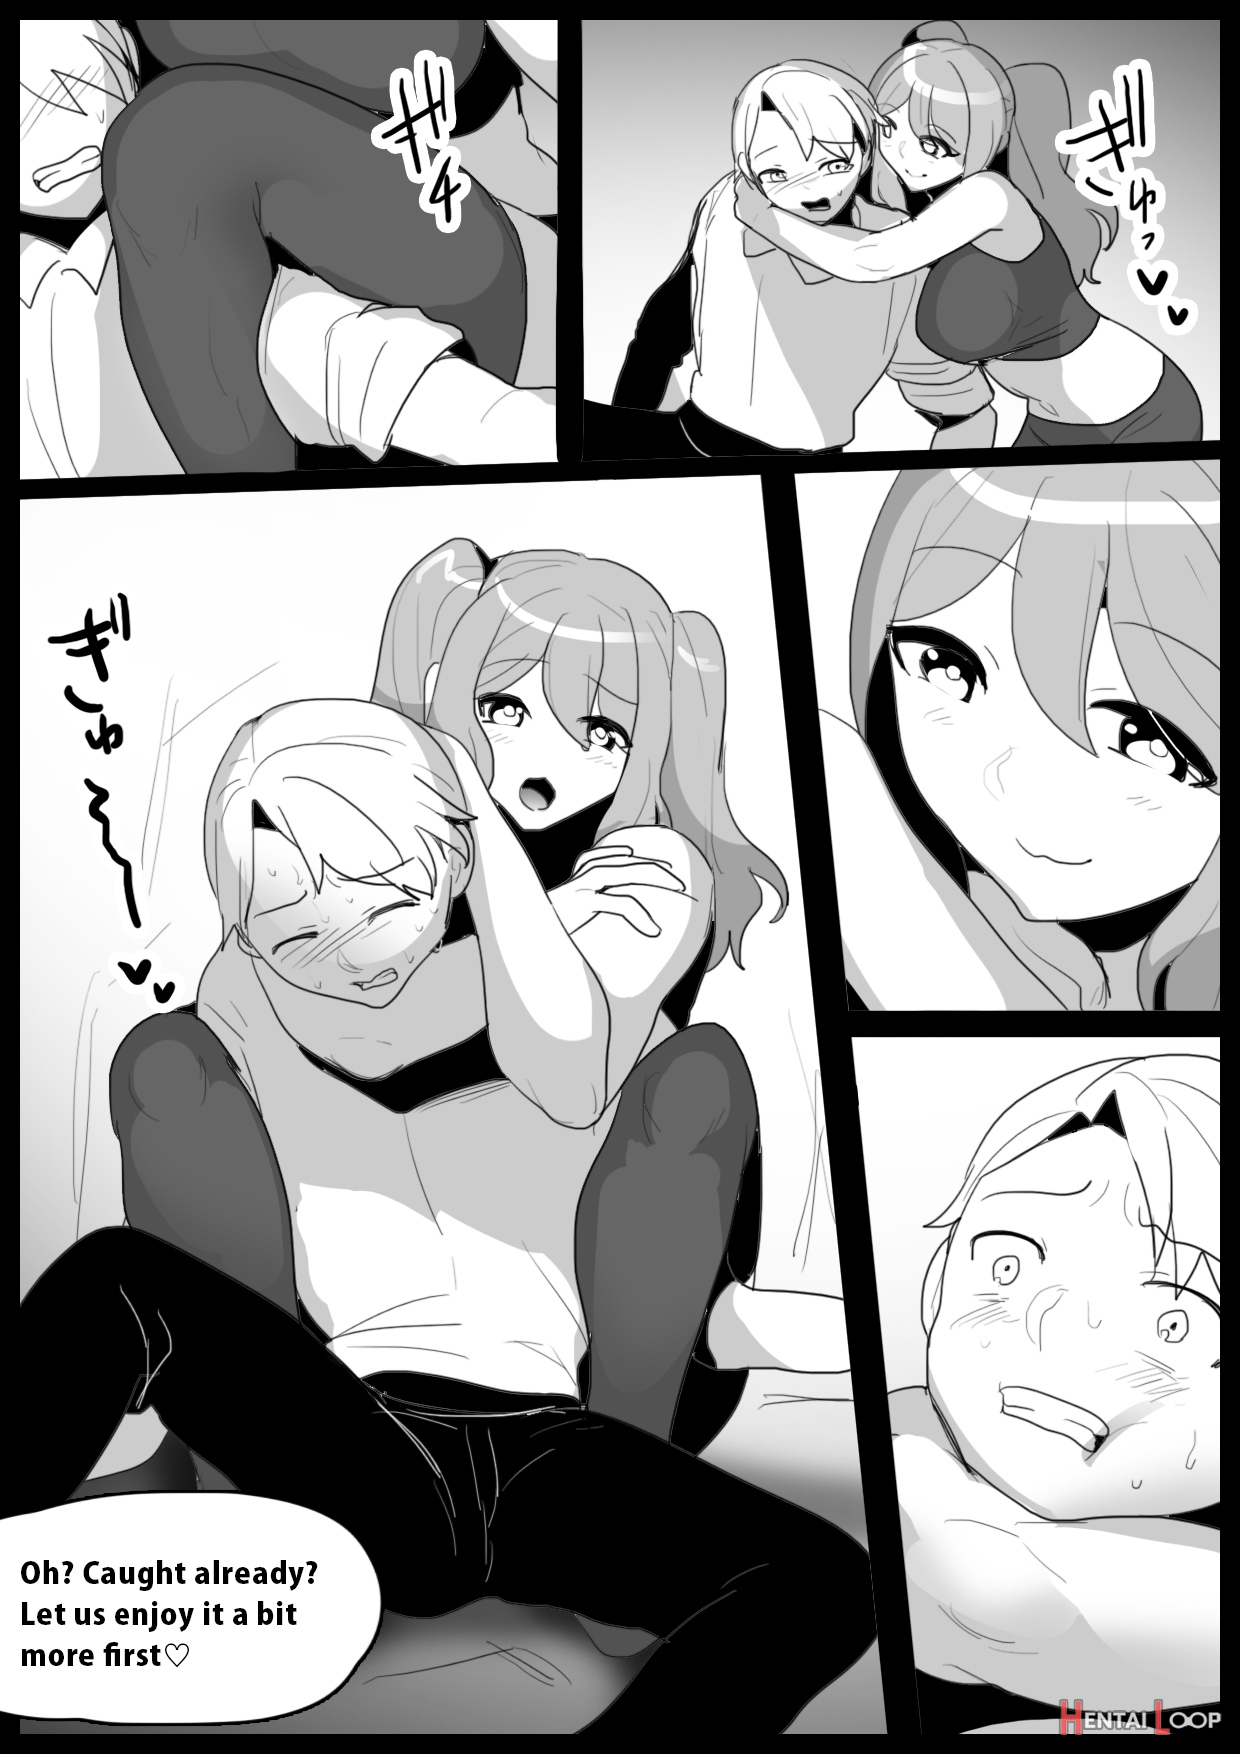 Girls Beat! -vs Aina & Rie- page 4